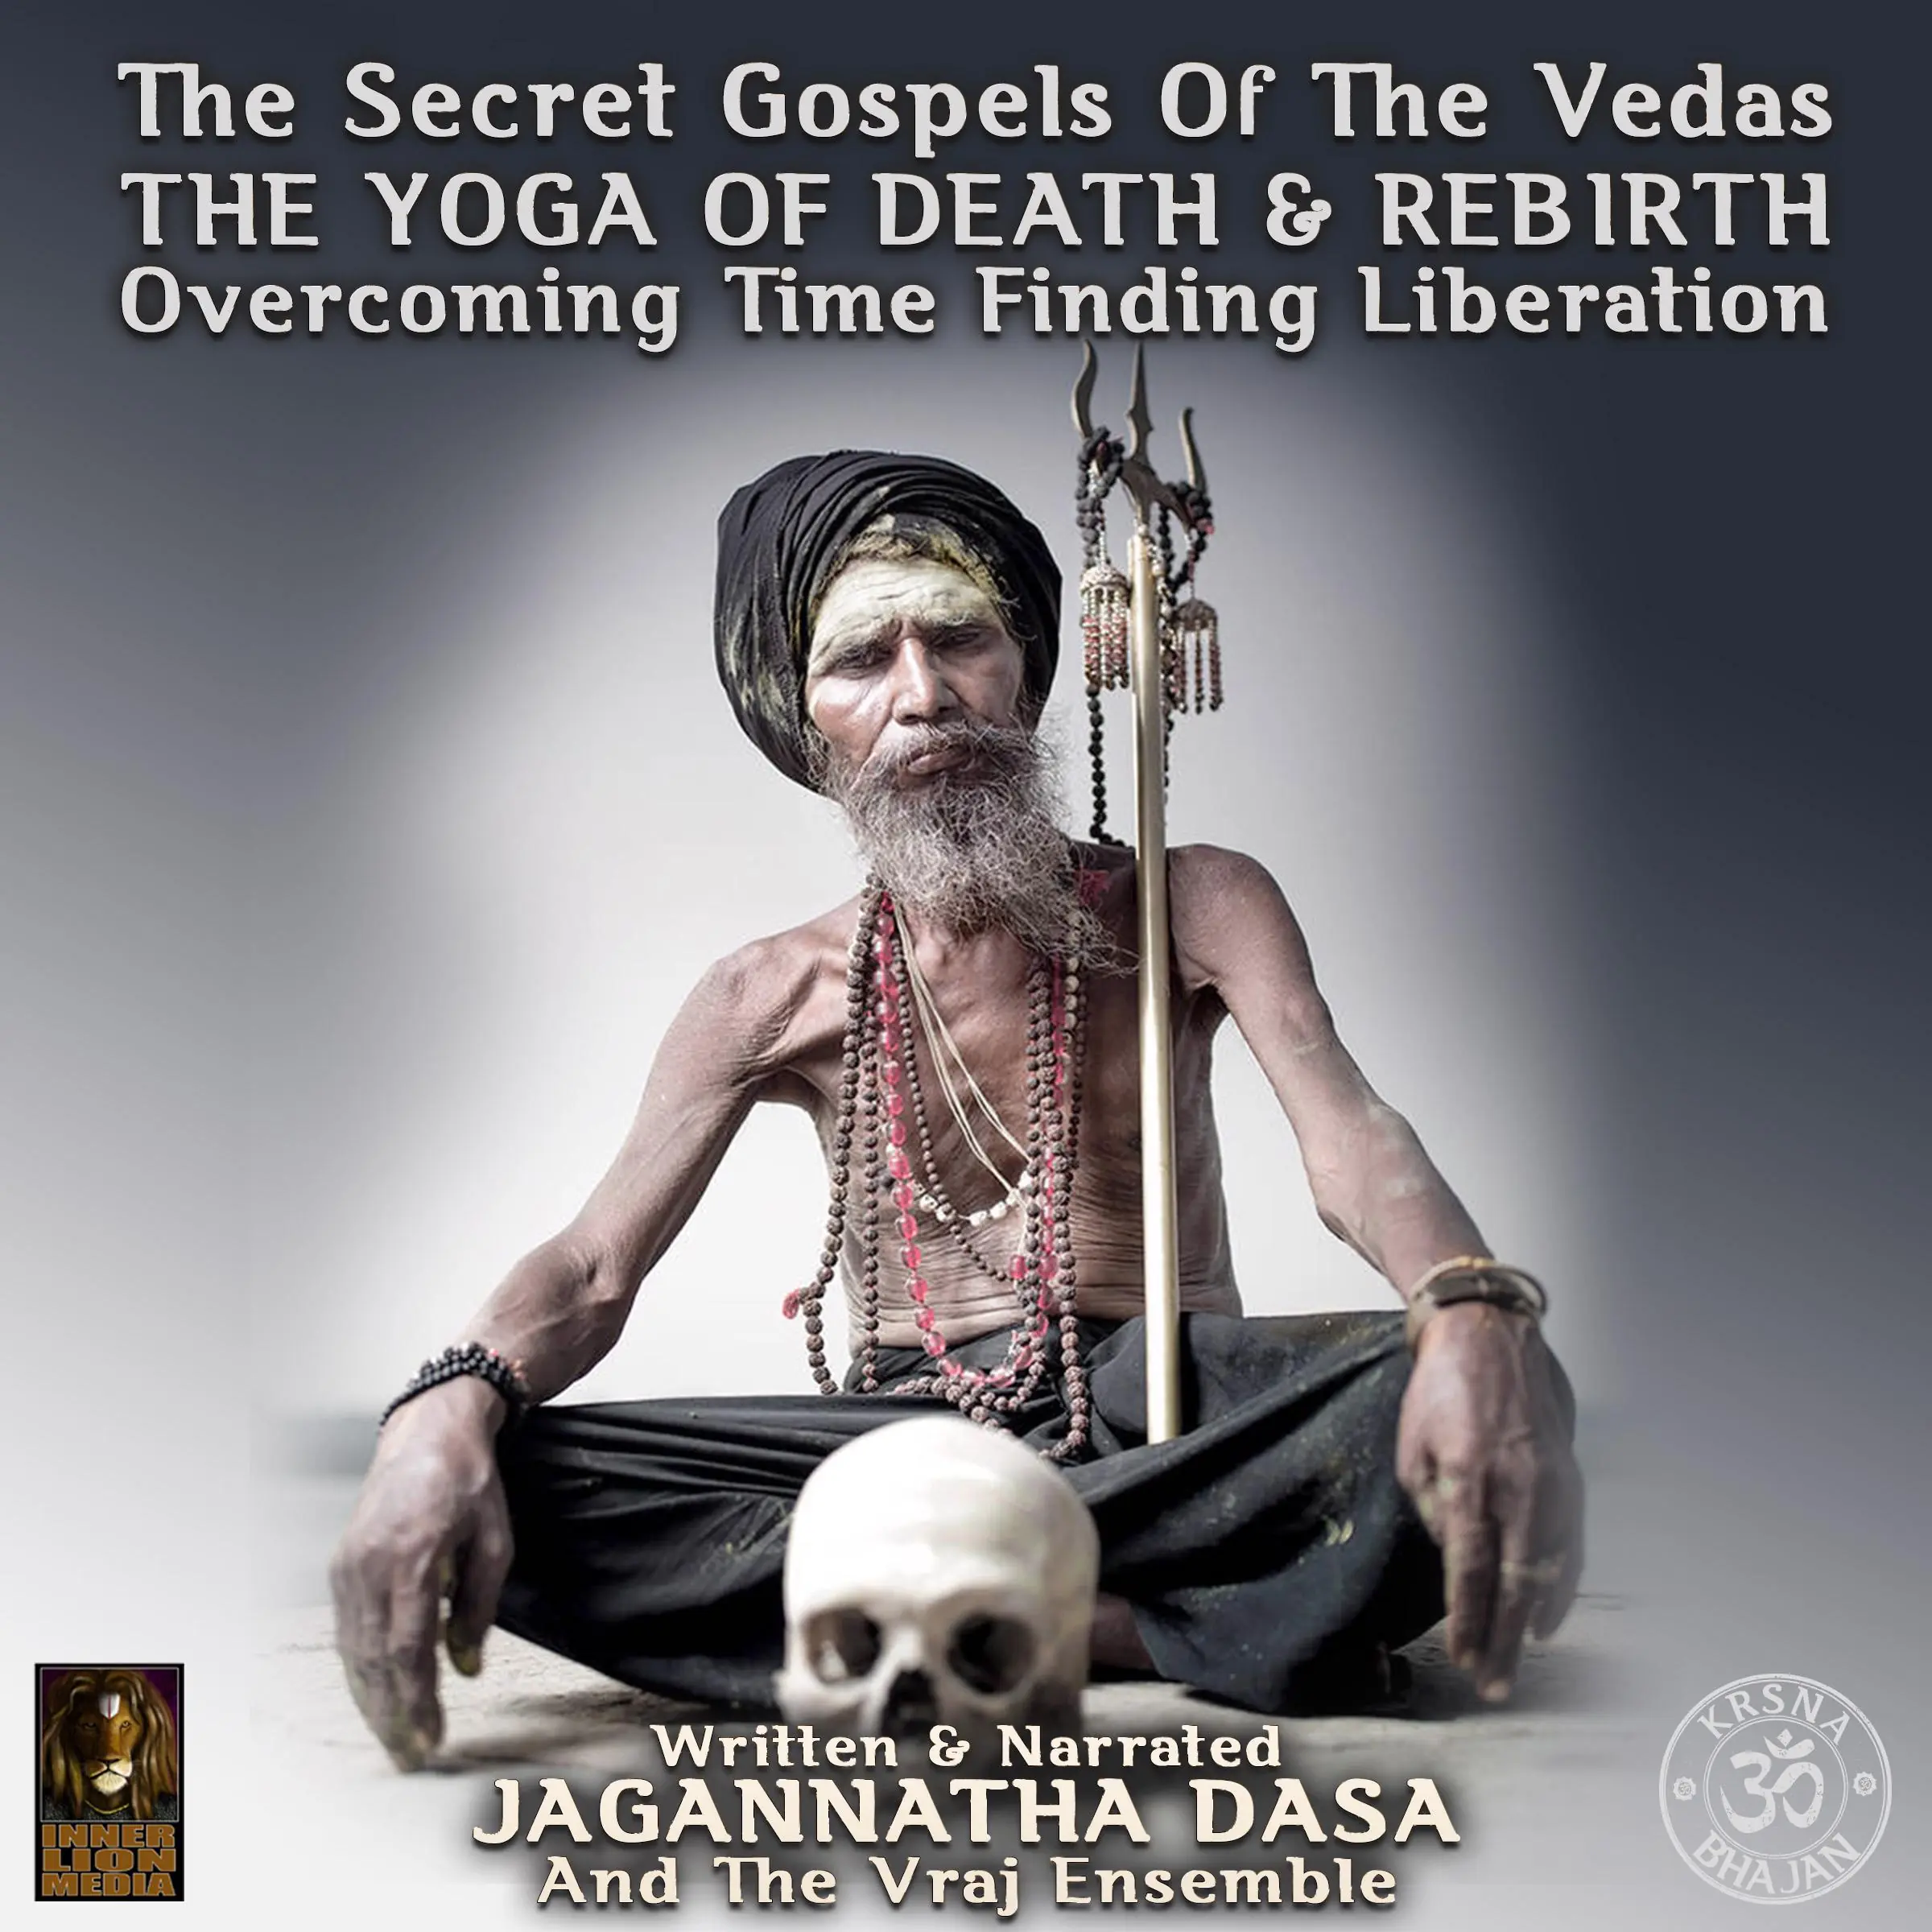 The Secret Gospels Of The Vedas - The Yoga Of Death & Rebirth Overcoming Time Finding Liberation Audiobook by Jagannatha Dasa And The Vraj Ensemble